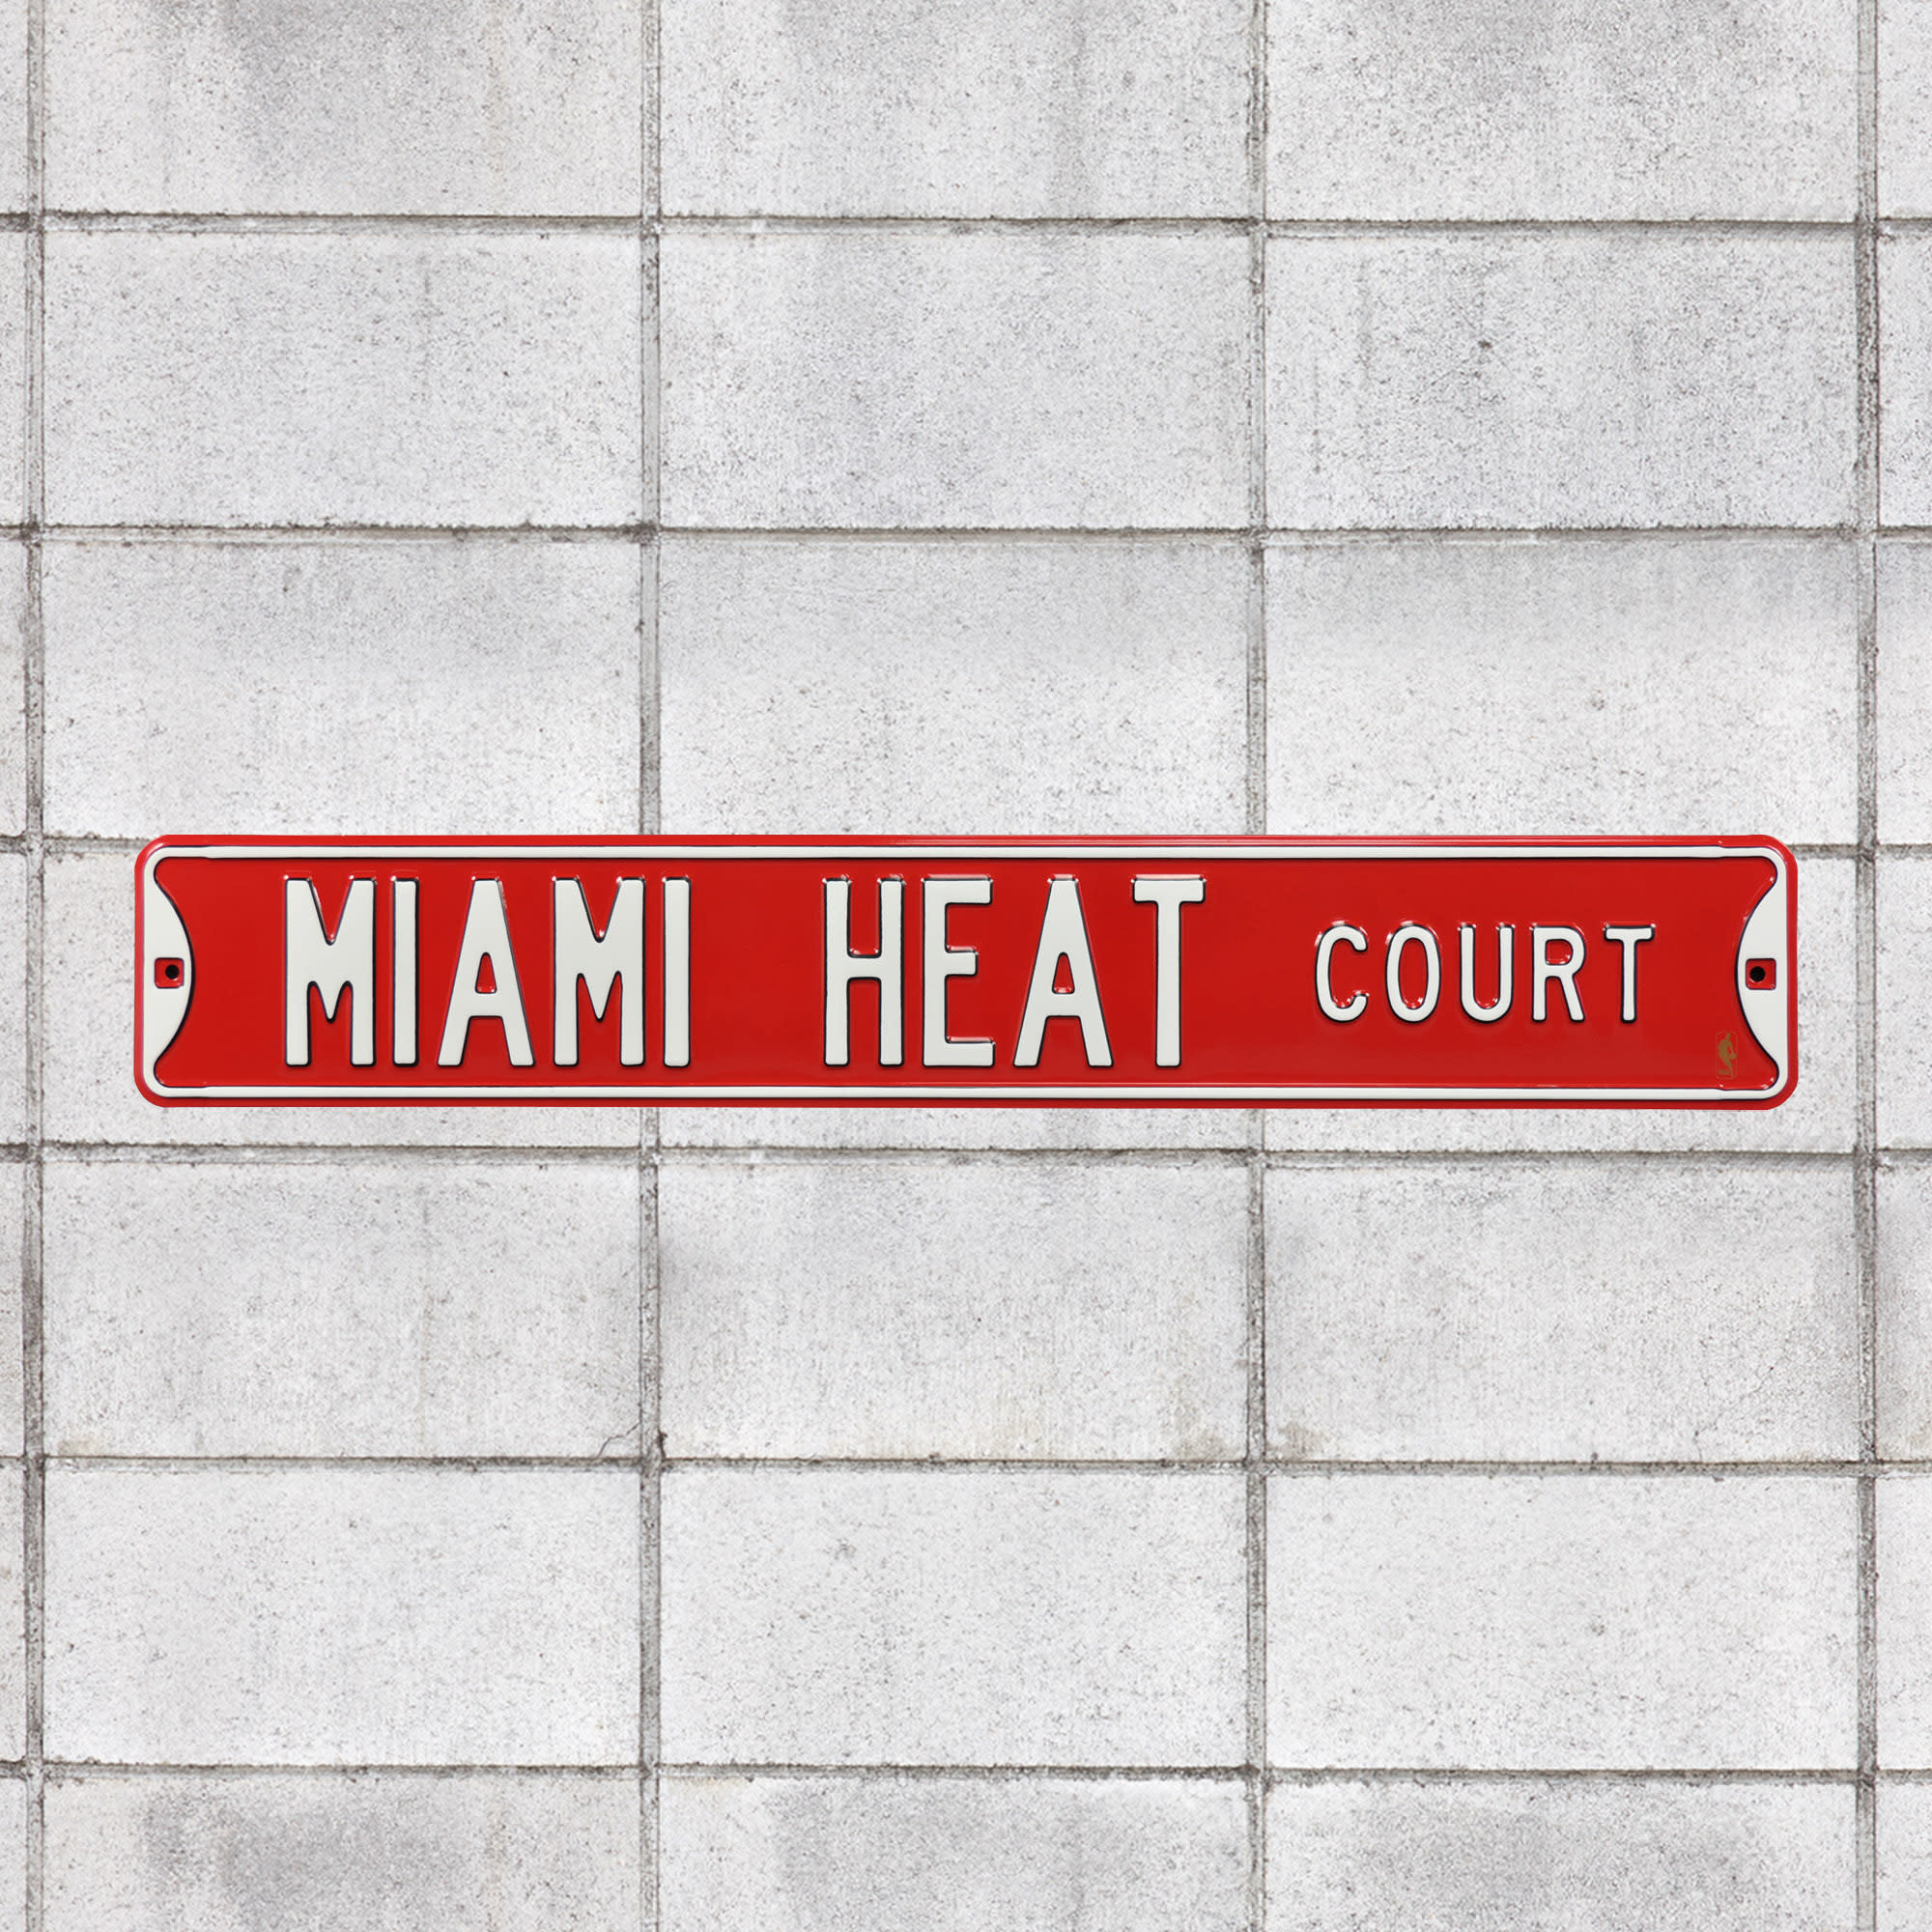 Miami Heat: Court - Officially Licensed NBA Metal Street Sign 36.0"W x 6.0"H by Fathead | 100% Steel